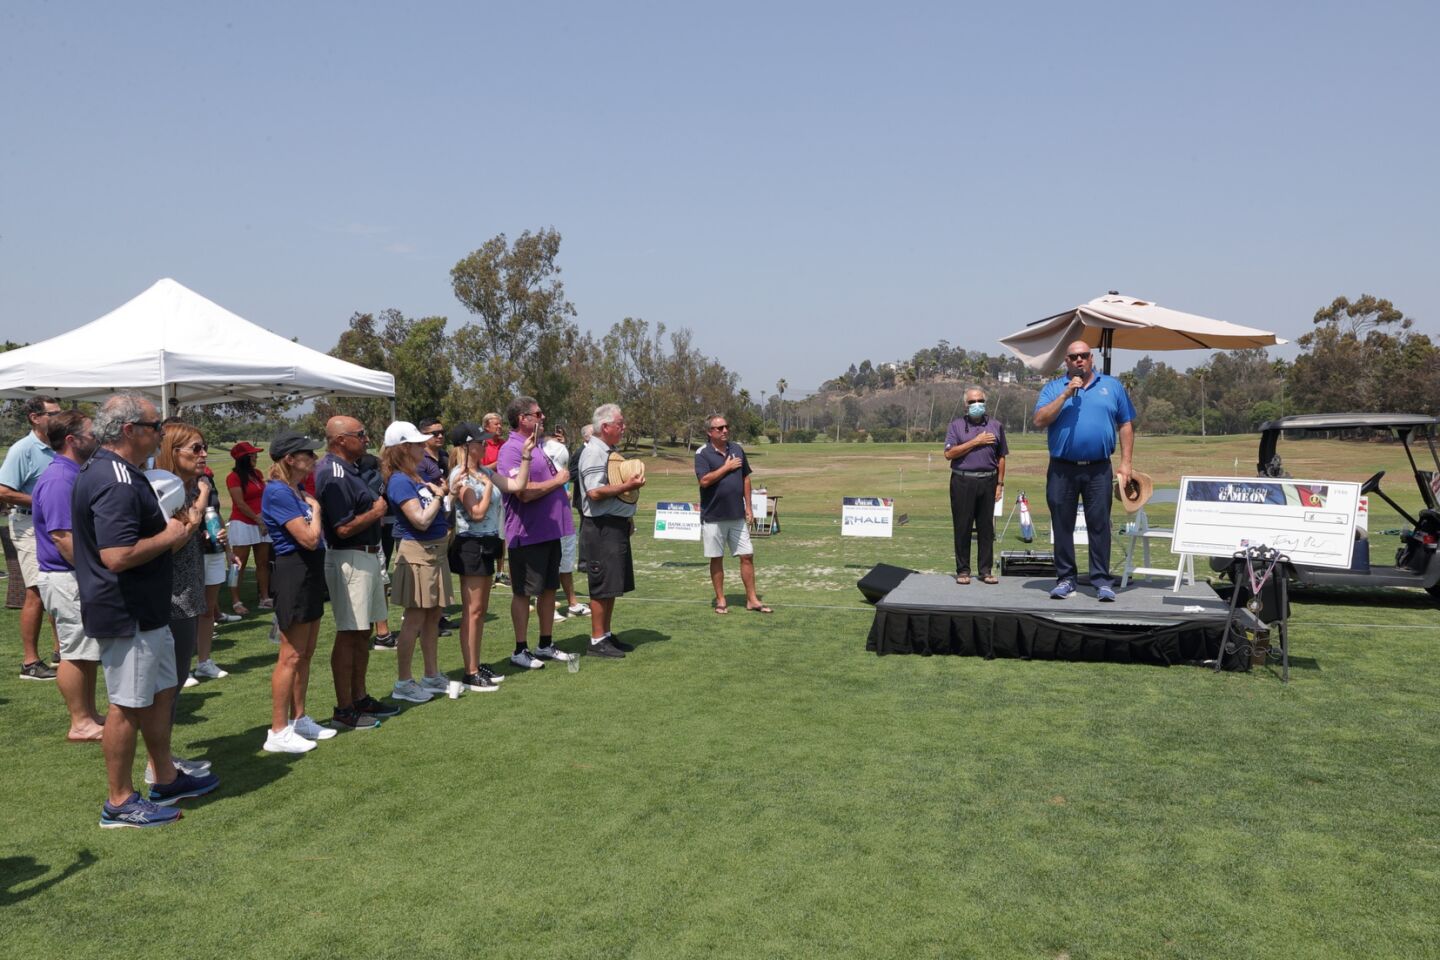 Chris Lesson of Del Mar Golf Center leads the National Anthem at the Operation Game On event